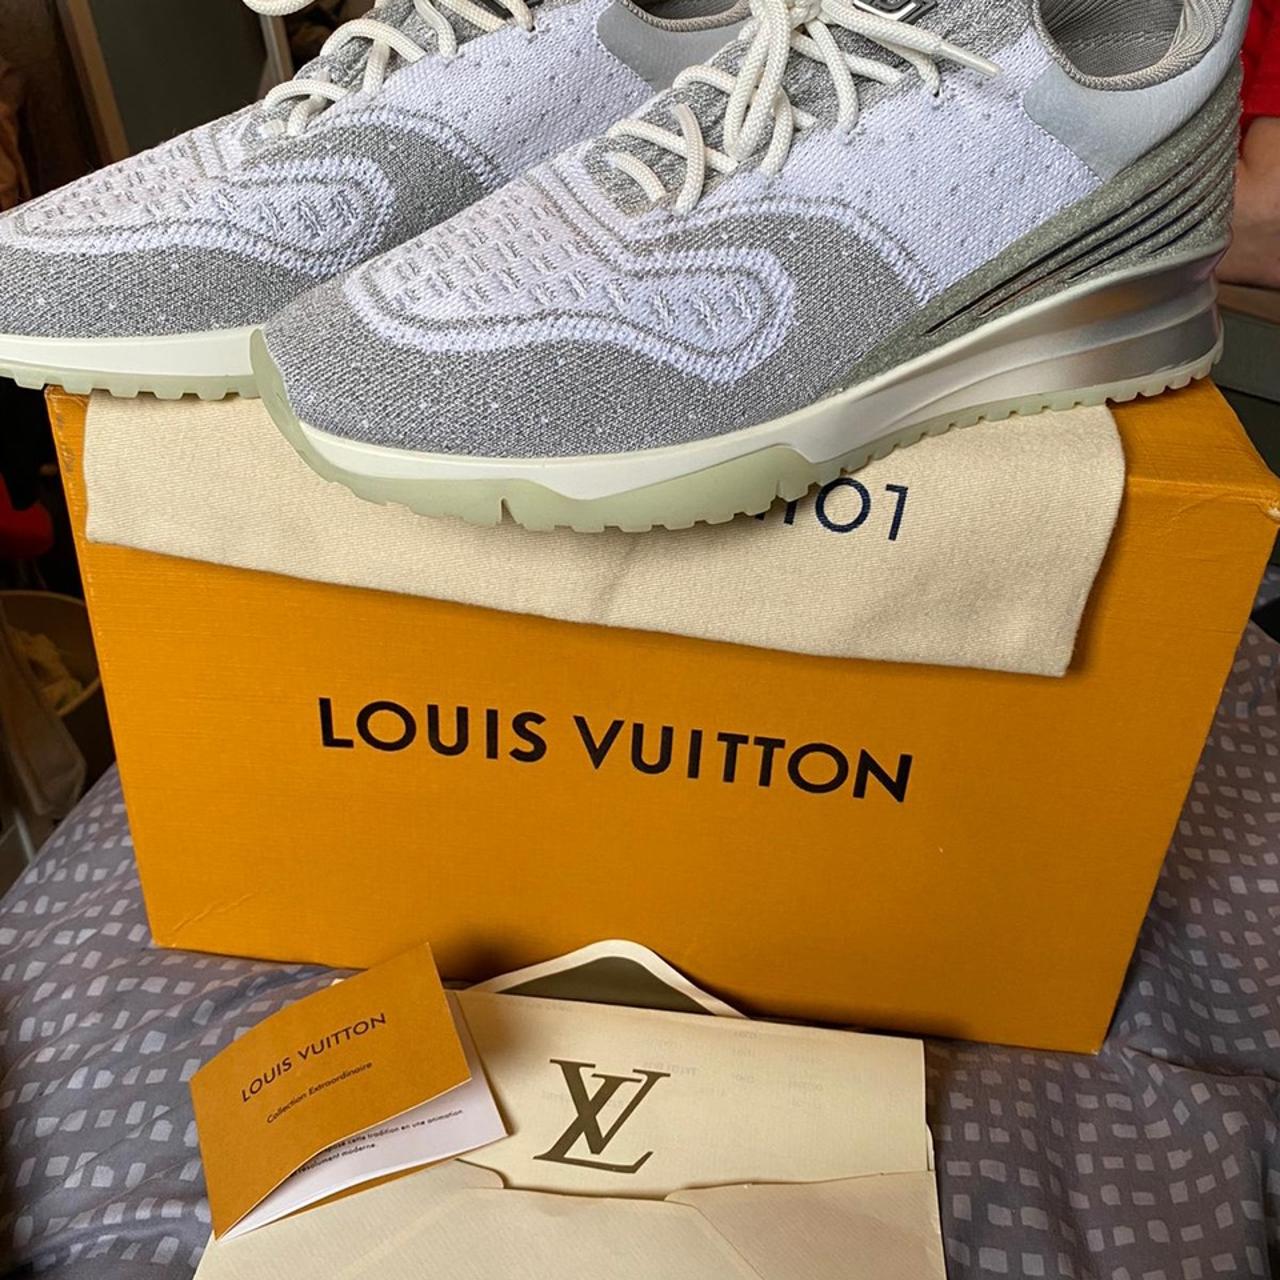 Louis Vuitton LV TRAINER SNEAKER Brand New with Box - Depop